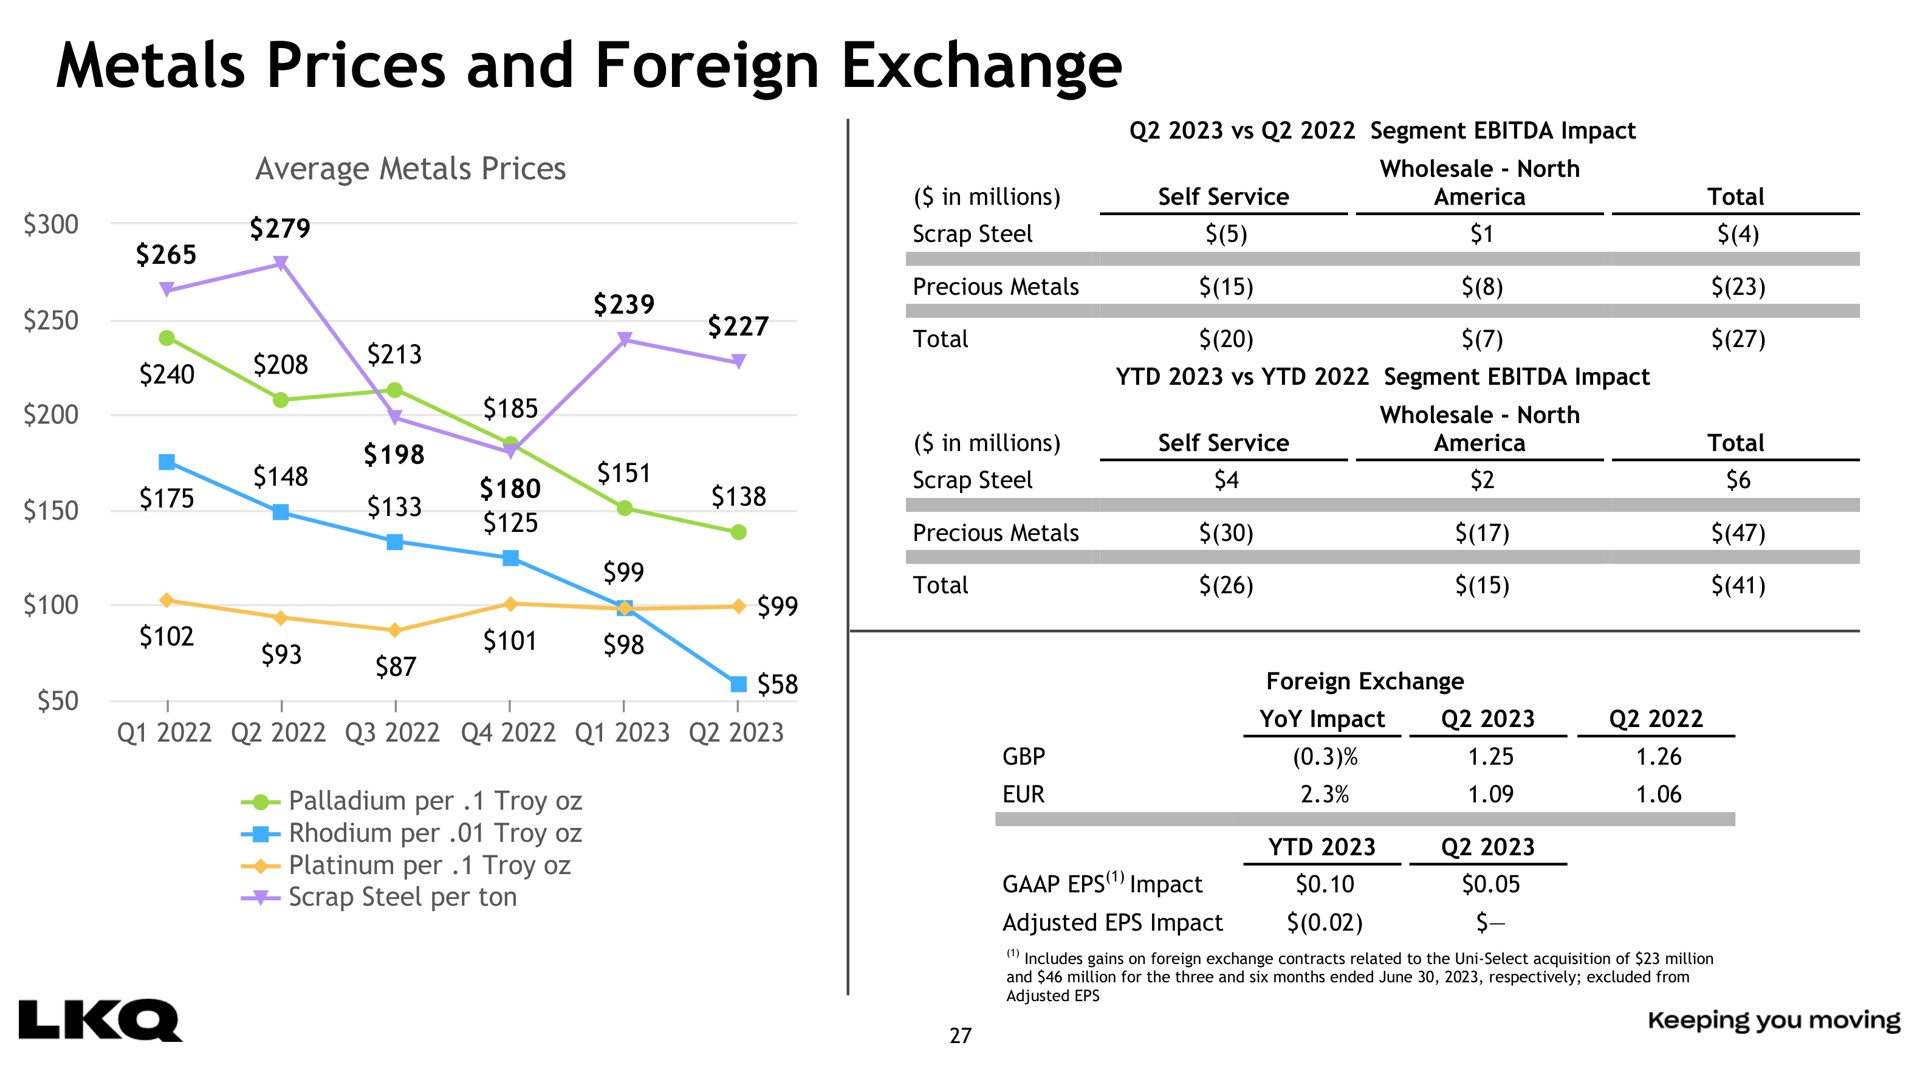 metals prices and foreign exchange | LKQ